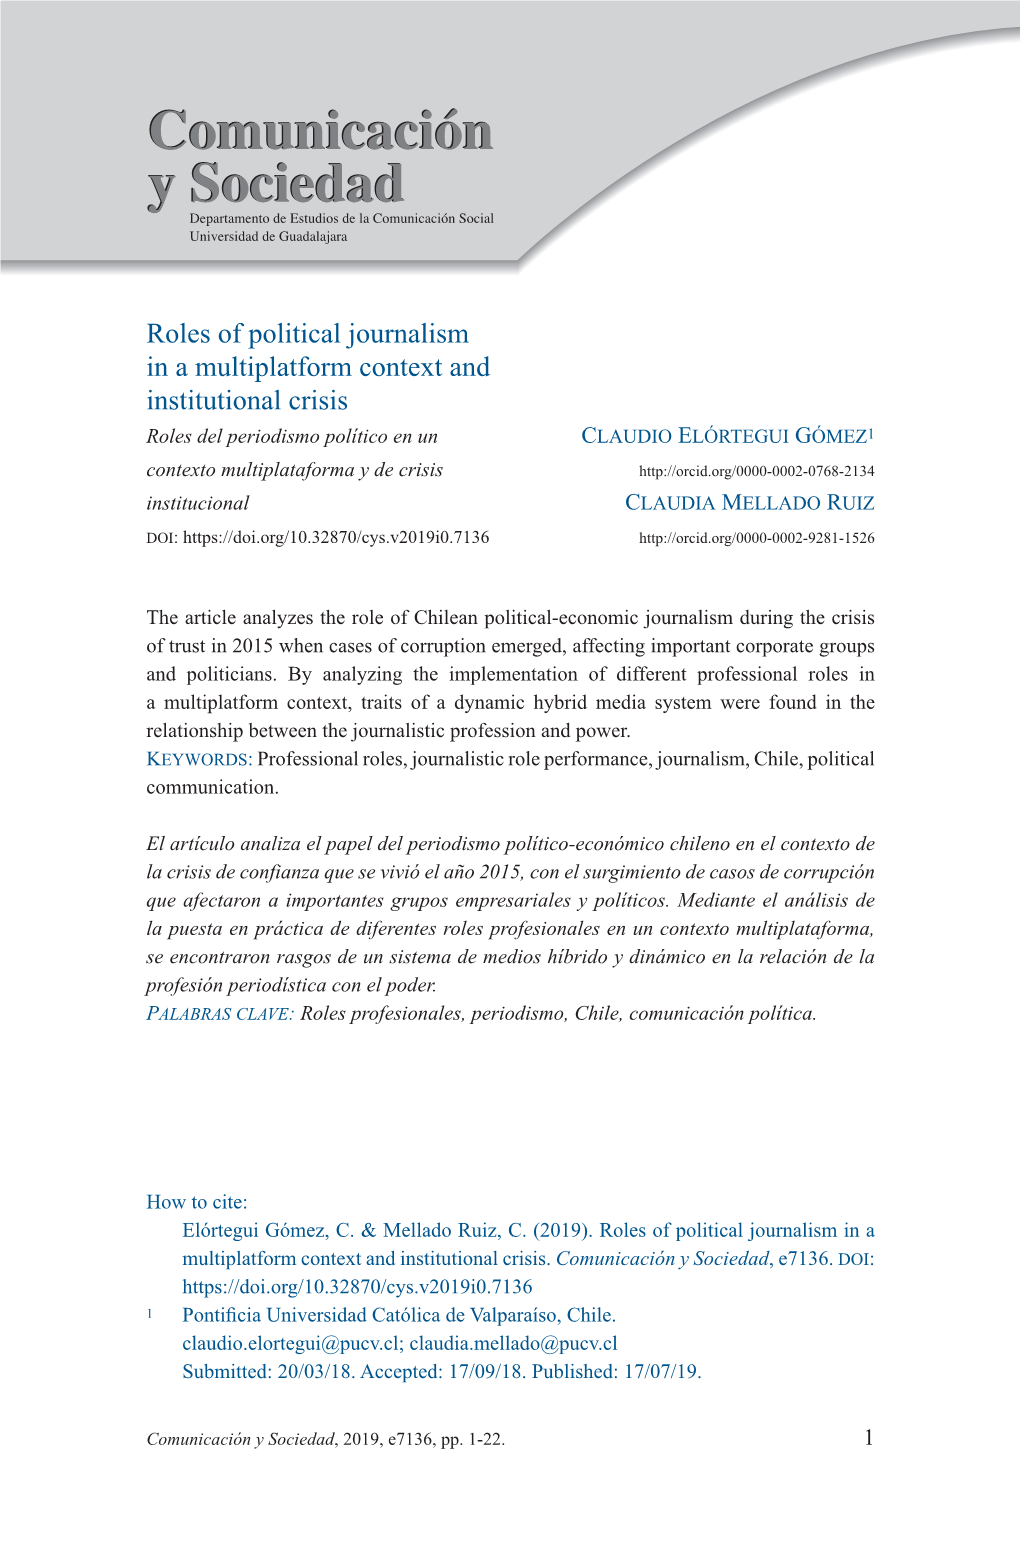 Roles of Political Journalism in a Multiplatform Context And